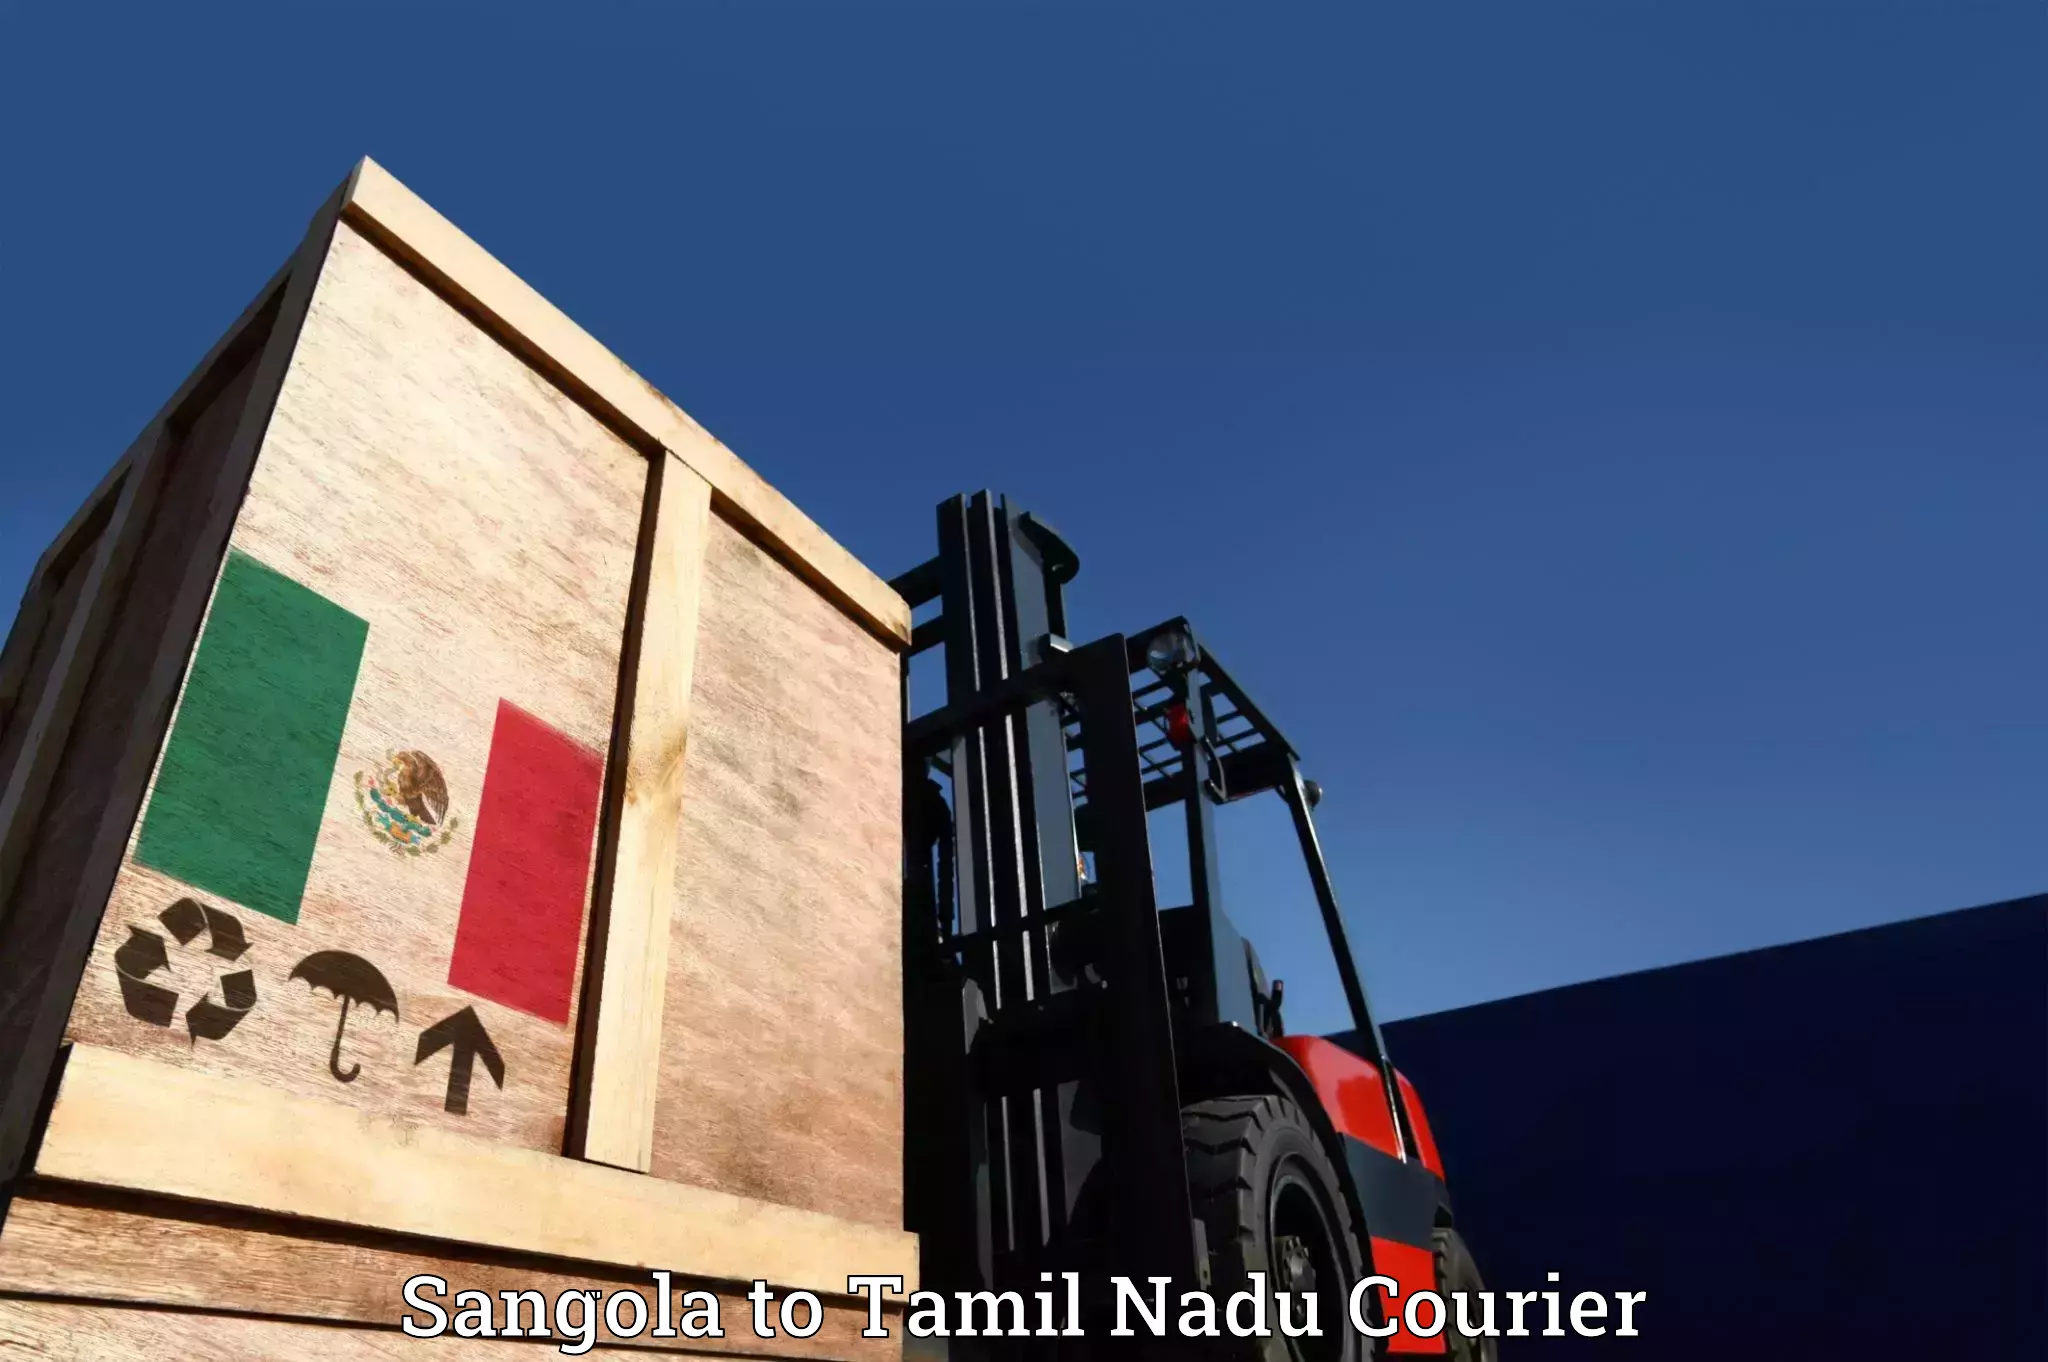 Trusted relocation experts Sangola to Tamil Nadu